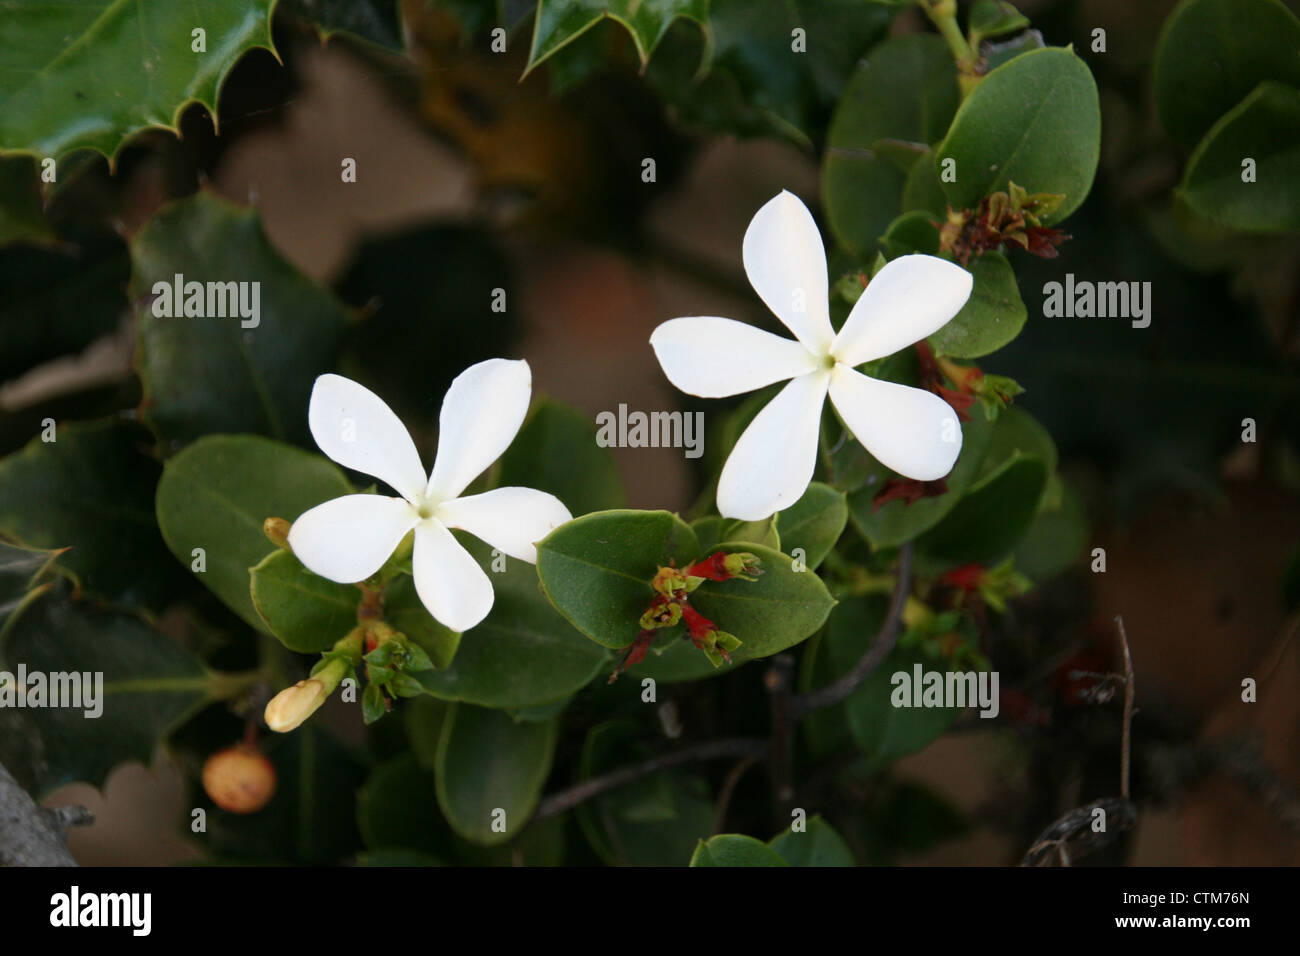 Two white blossoms on a flowering jasmine bush. Stock Photo